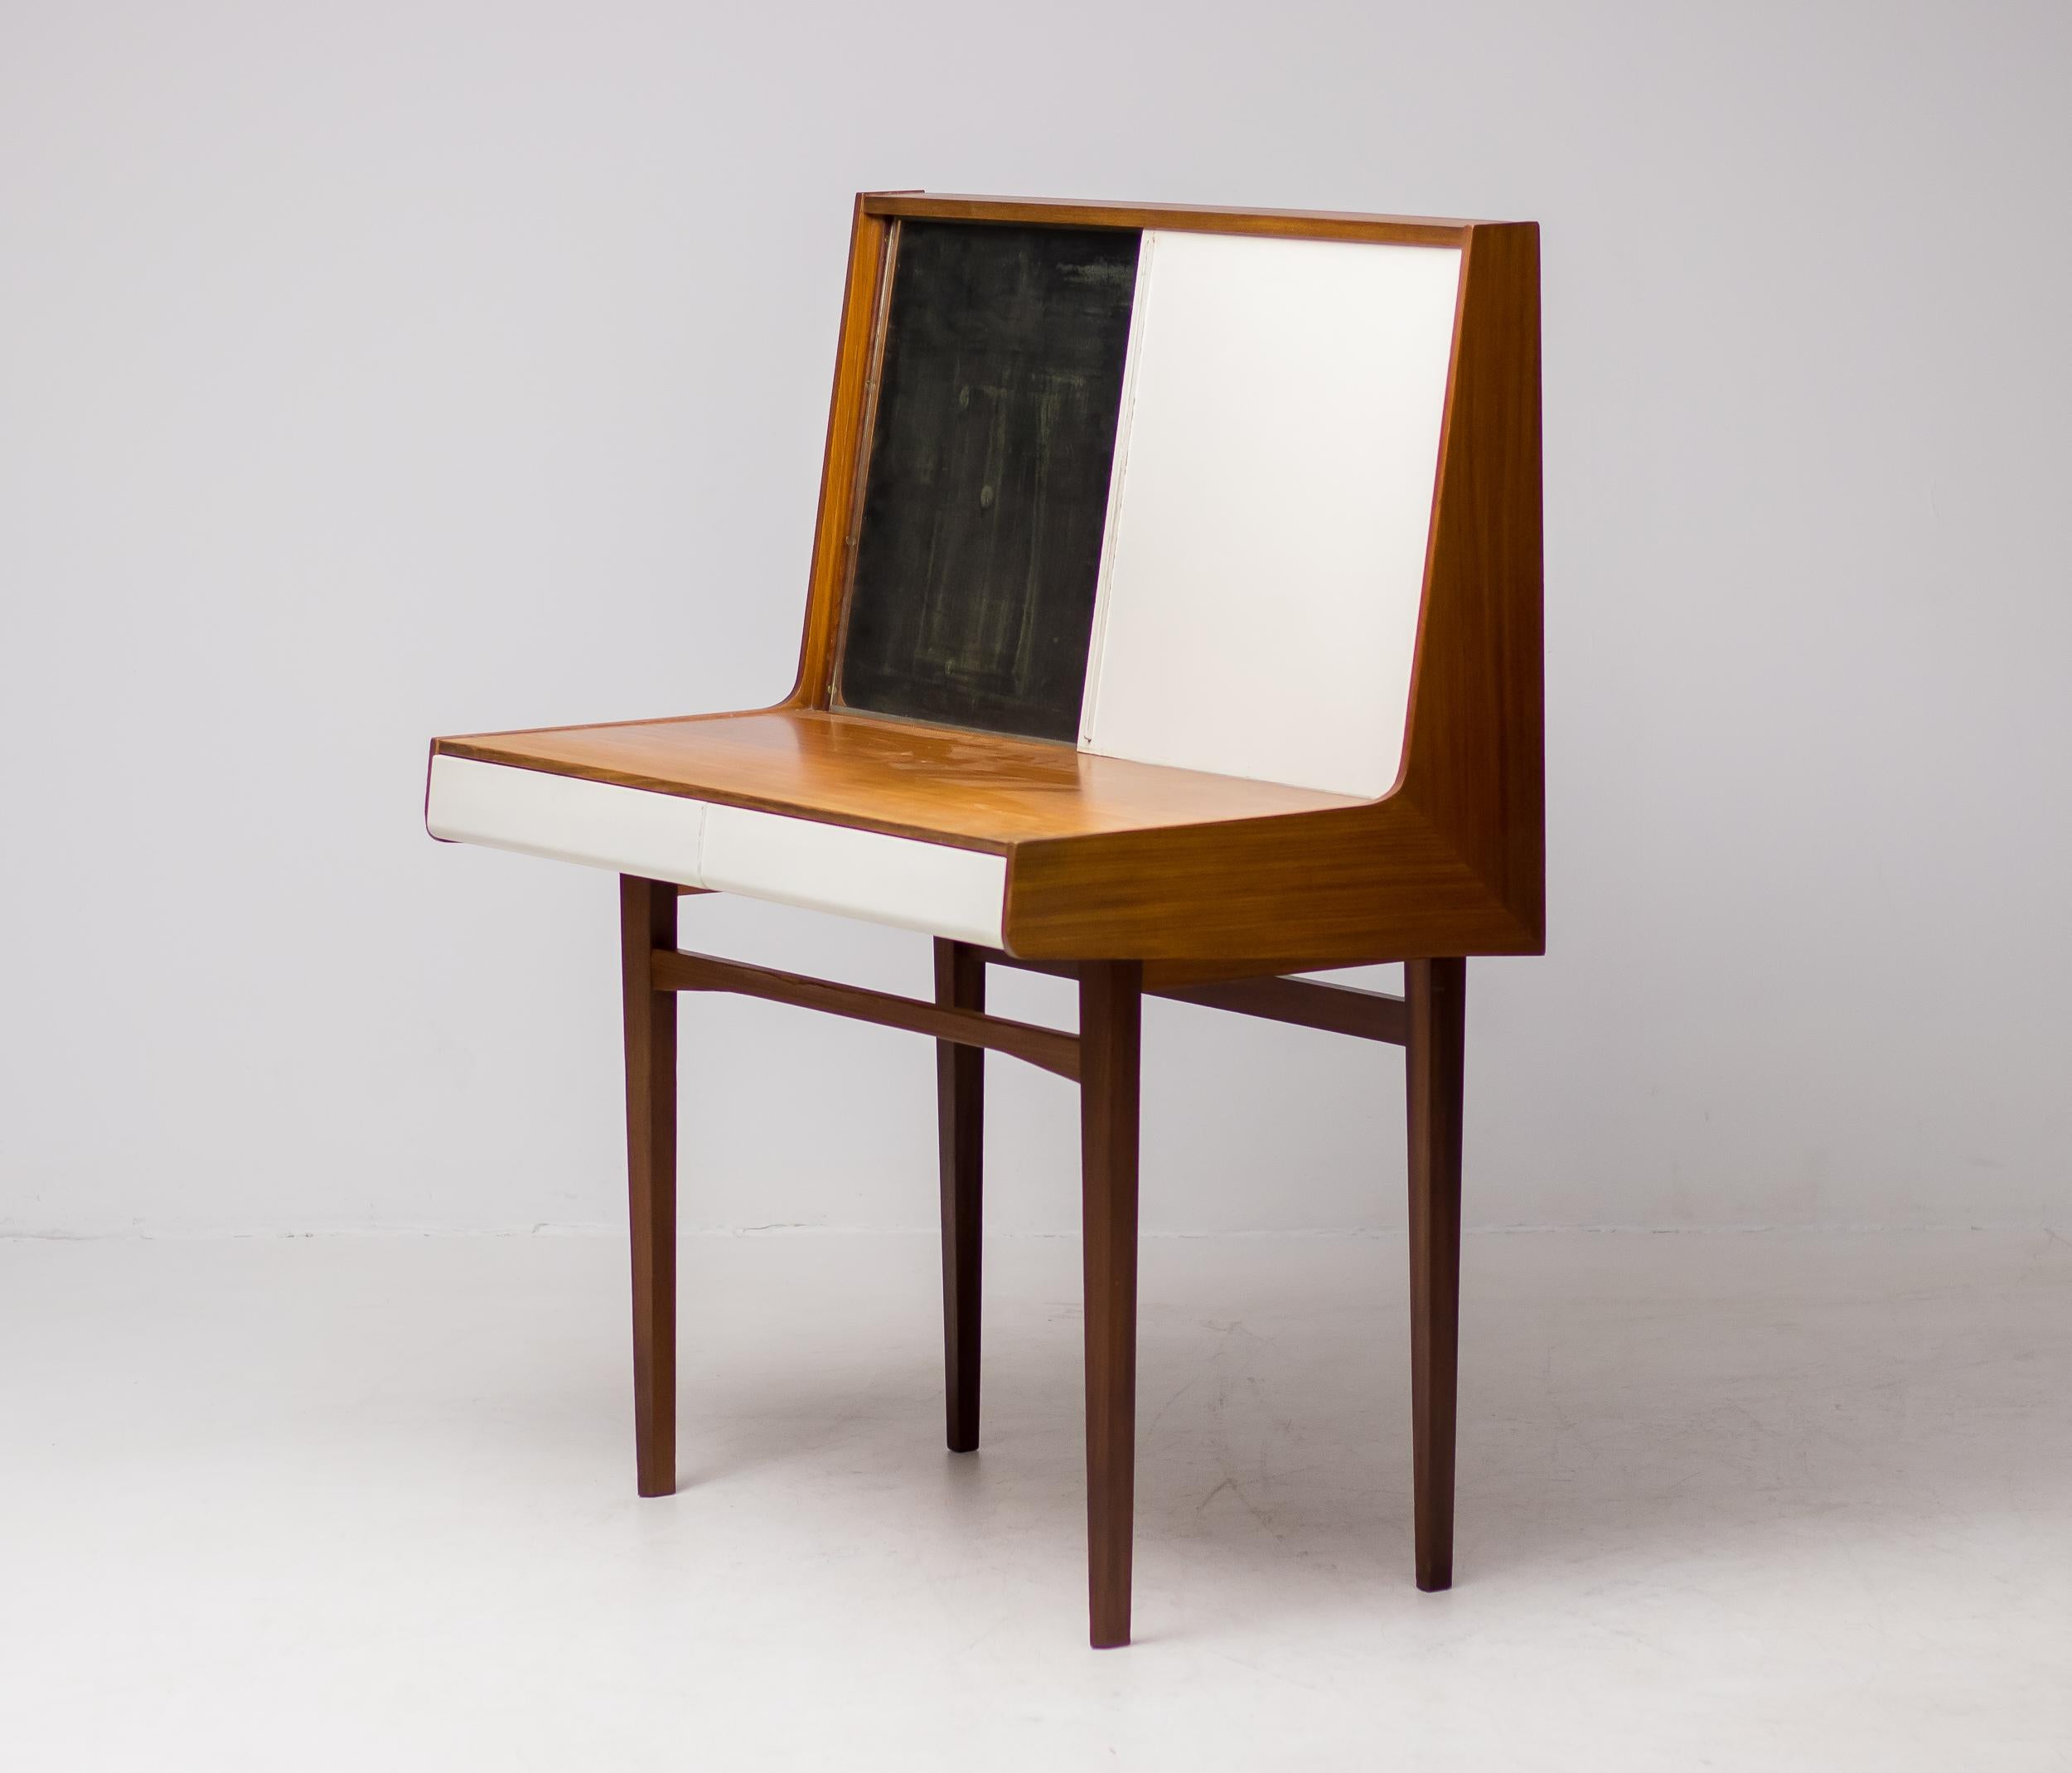 Elegant dressing table designed circa 1950 by Olof Ottelin for Stockmann Oy, Finland.
The mirror is worn from age, we will replace it with a contemporary mirror at no extra charge upon request.
Base in teak, drawer fronts and sliding door in